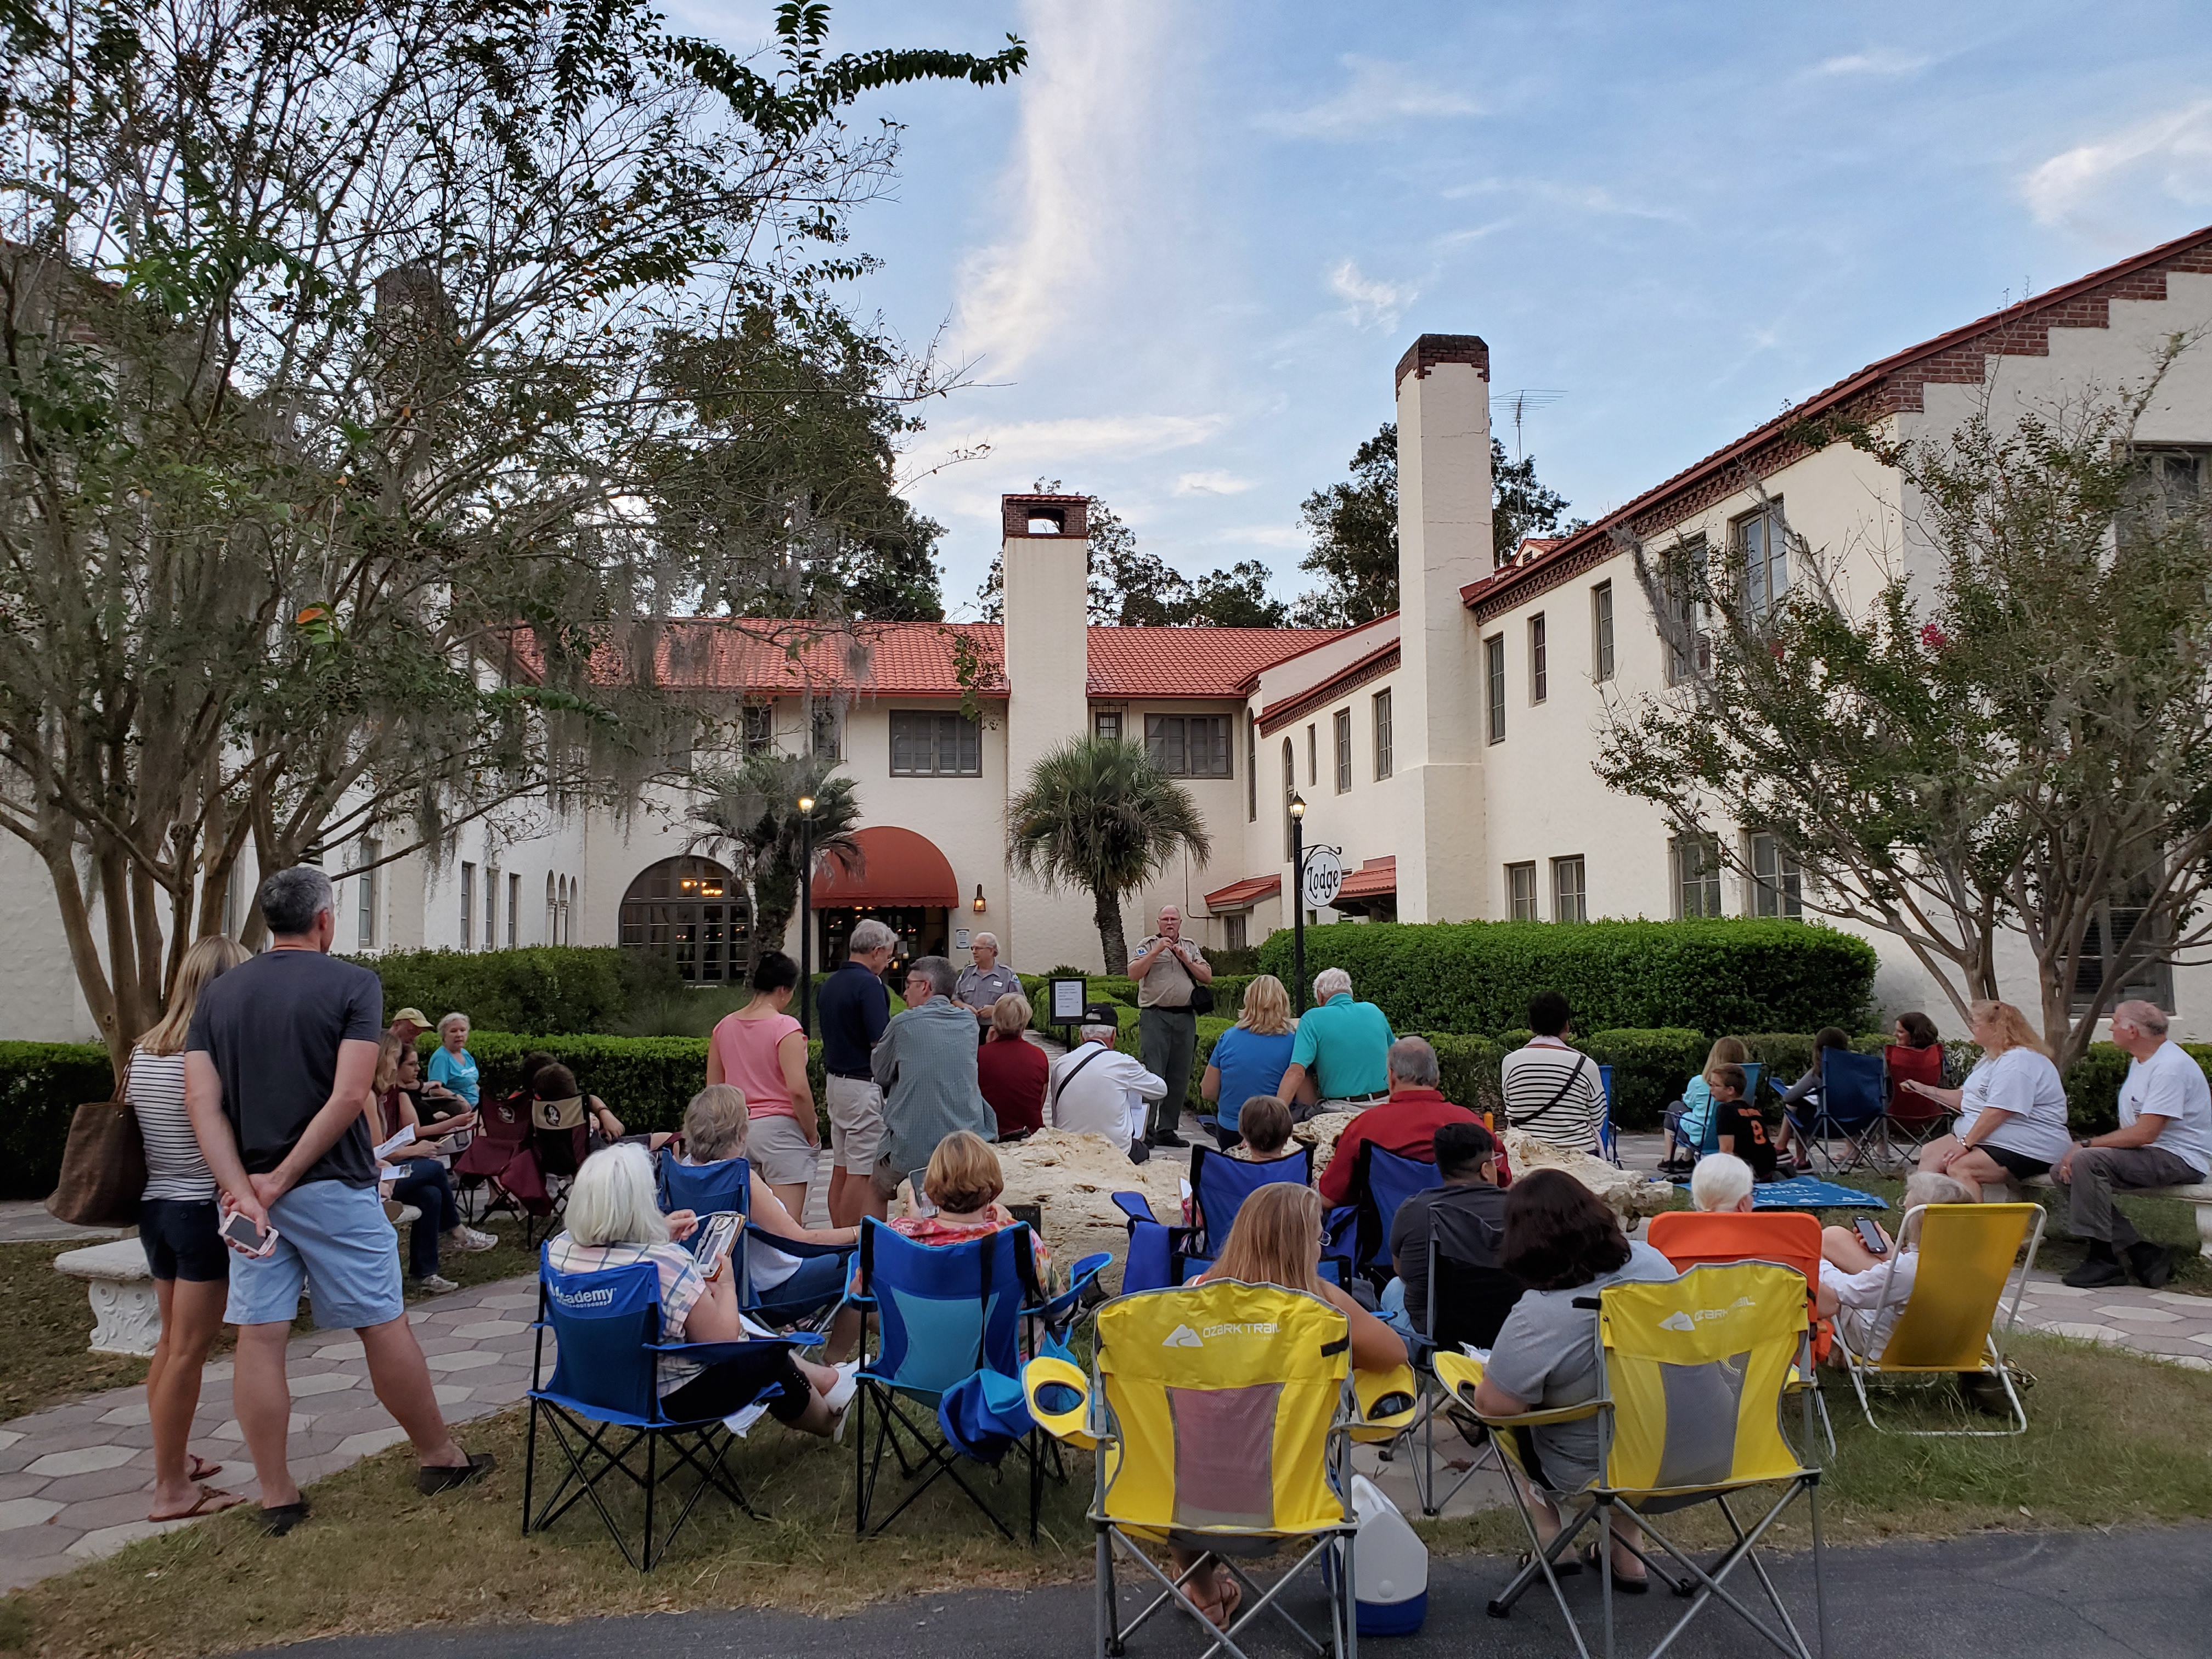 Visitors gather at the Lodge to learn about Chimney Swifts.